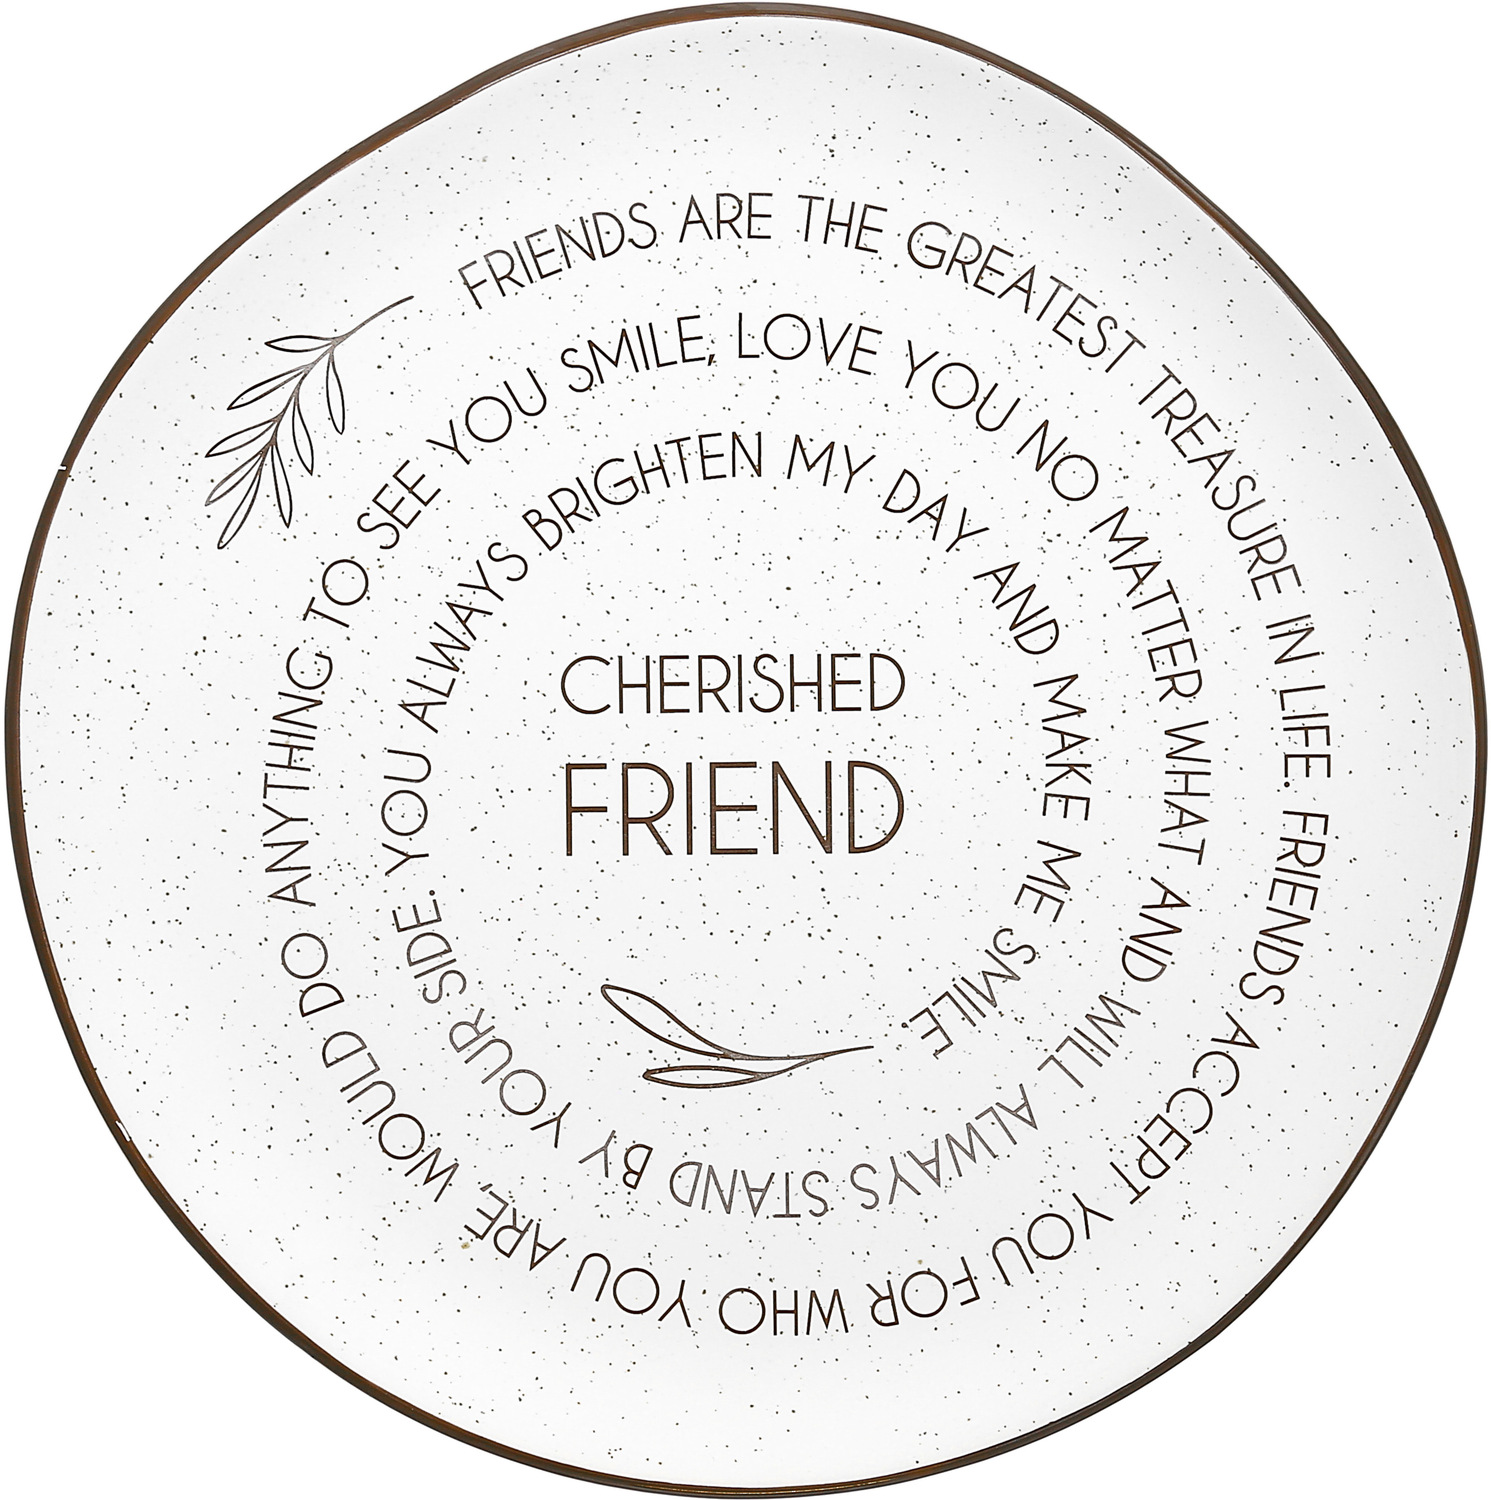 Cherished Friend by Hostess with the Mostess - Cherished Friend - 10.5" Ceramic Plate